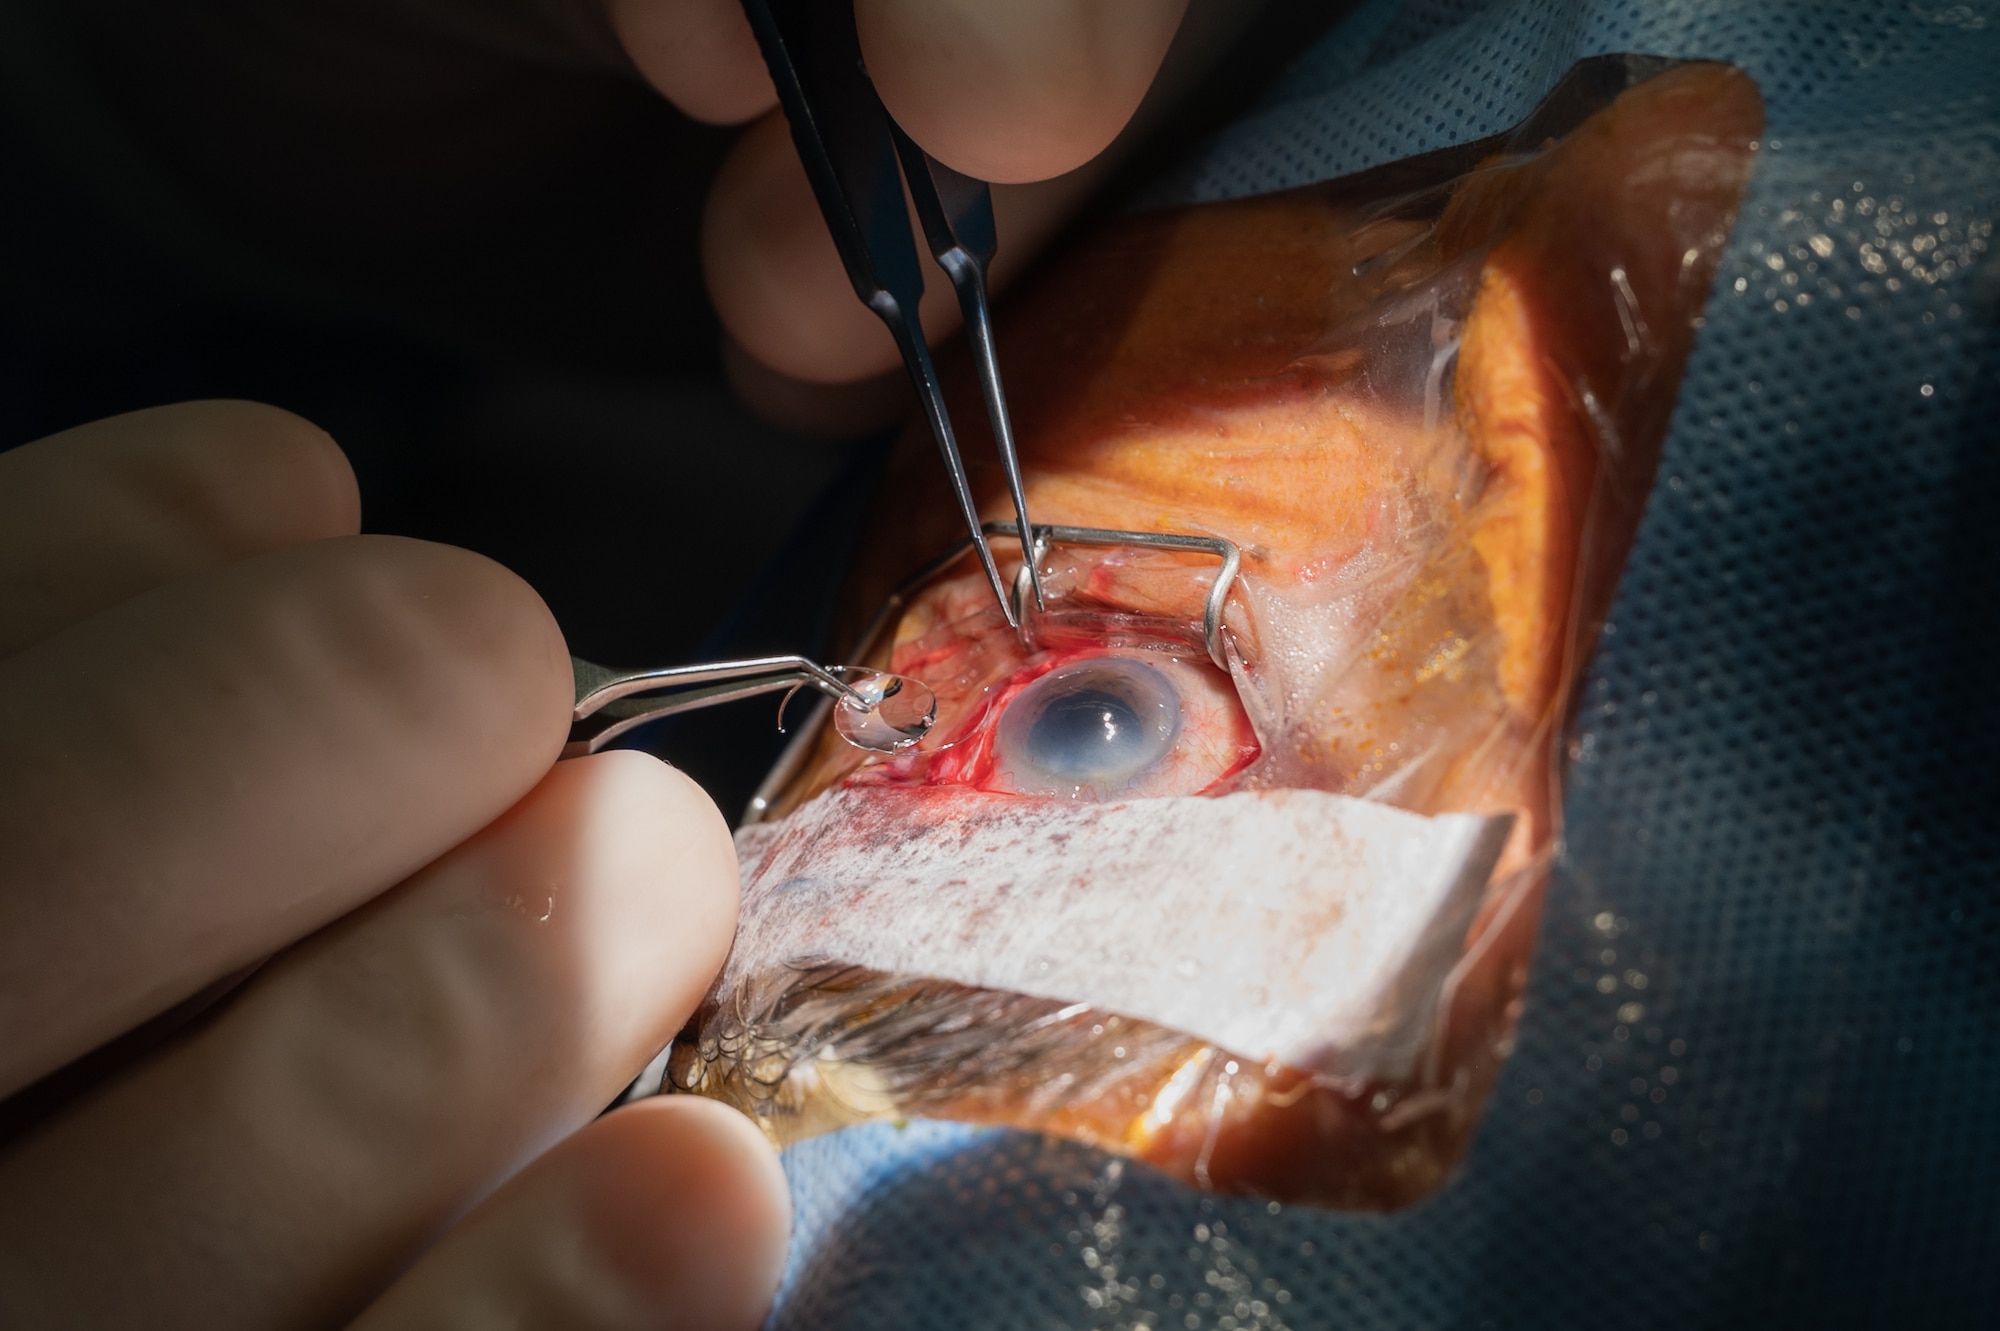 Image of an intraocular lens (IOL) being implanted into a patient's eye after successfully removing the cloudy lens during manual small incision cataract surgery.